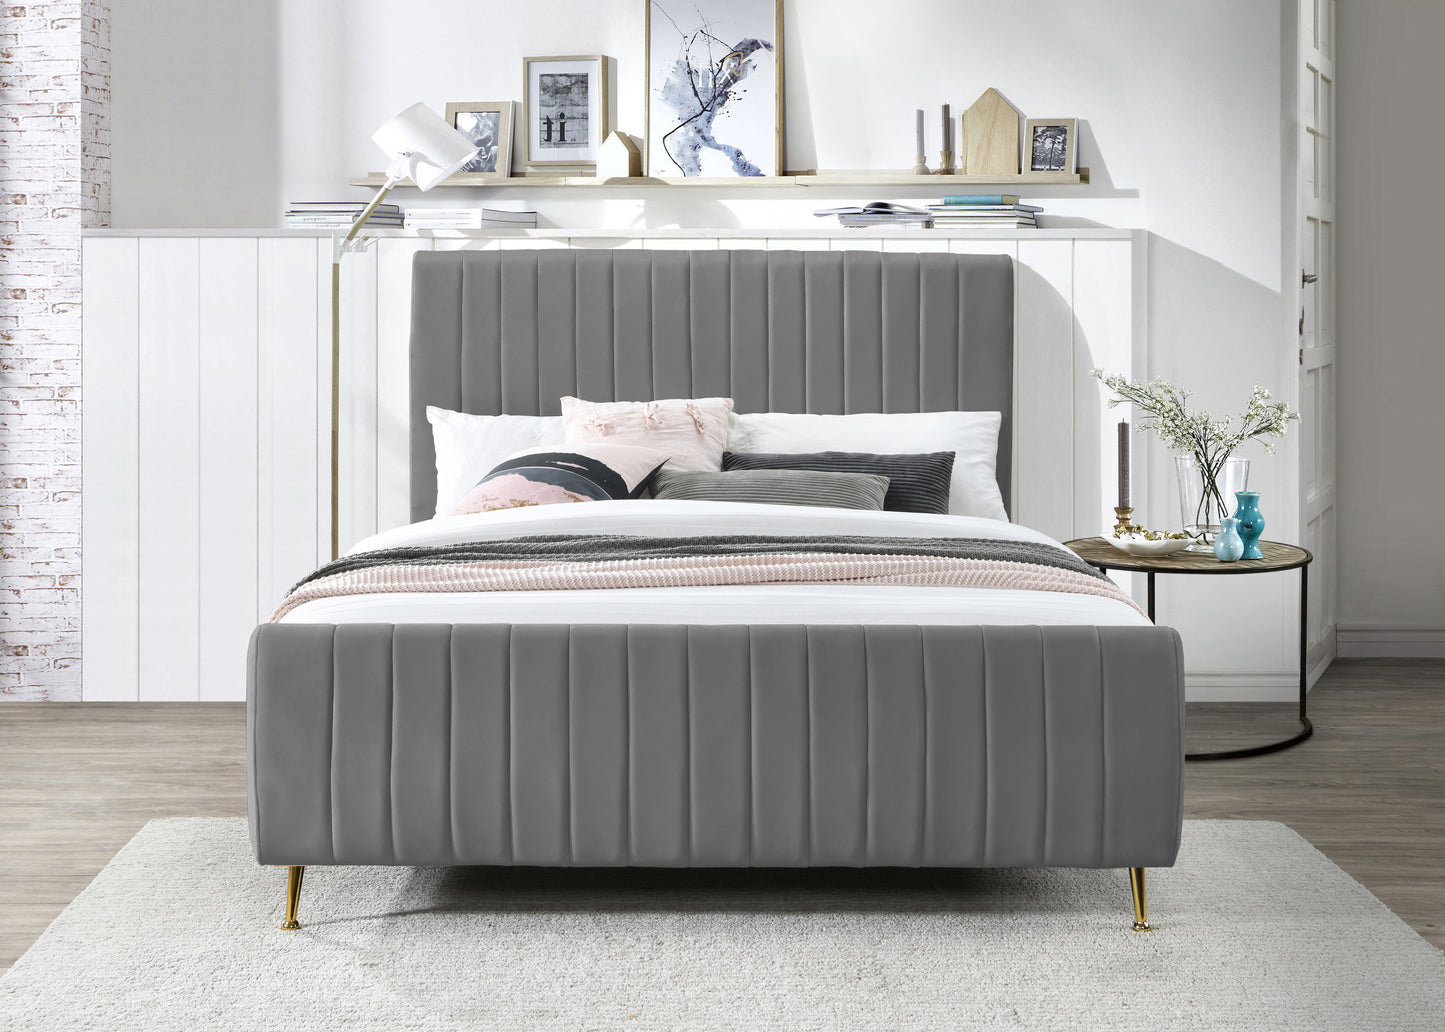 queen bed (3 boxes)